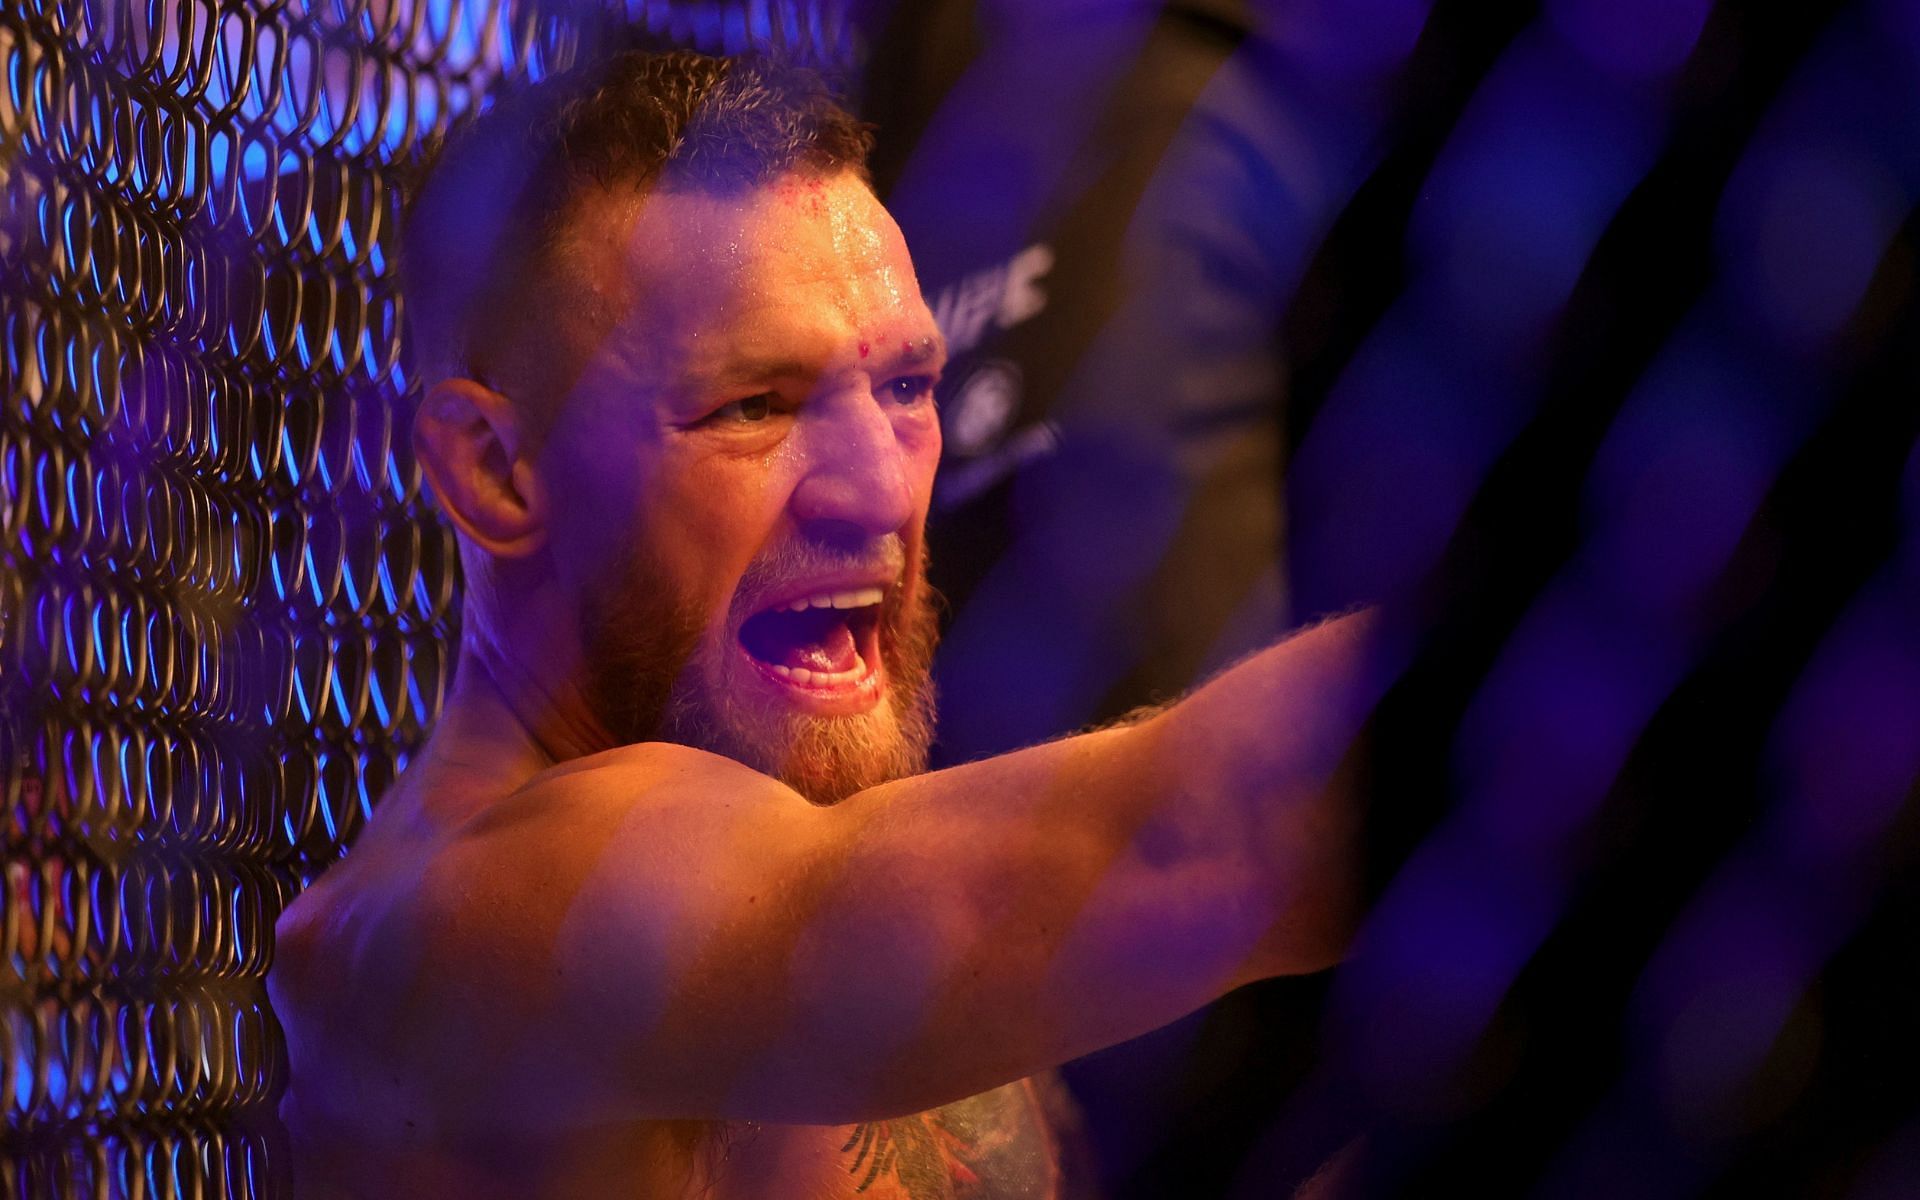 A frustrated Conor McGregor after his loss to Dustin Poirier at UFC 264